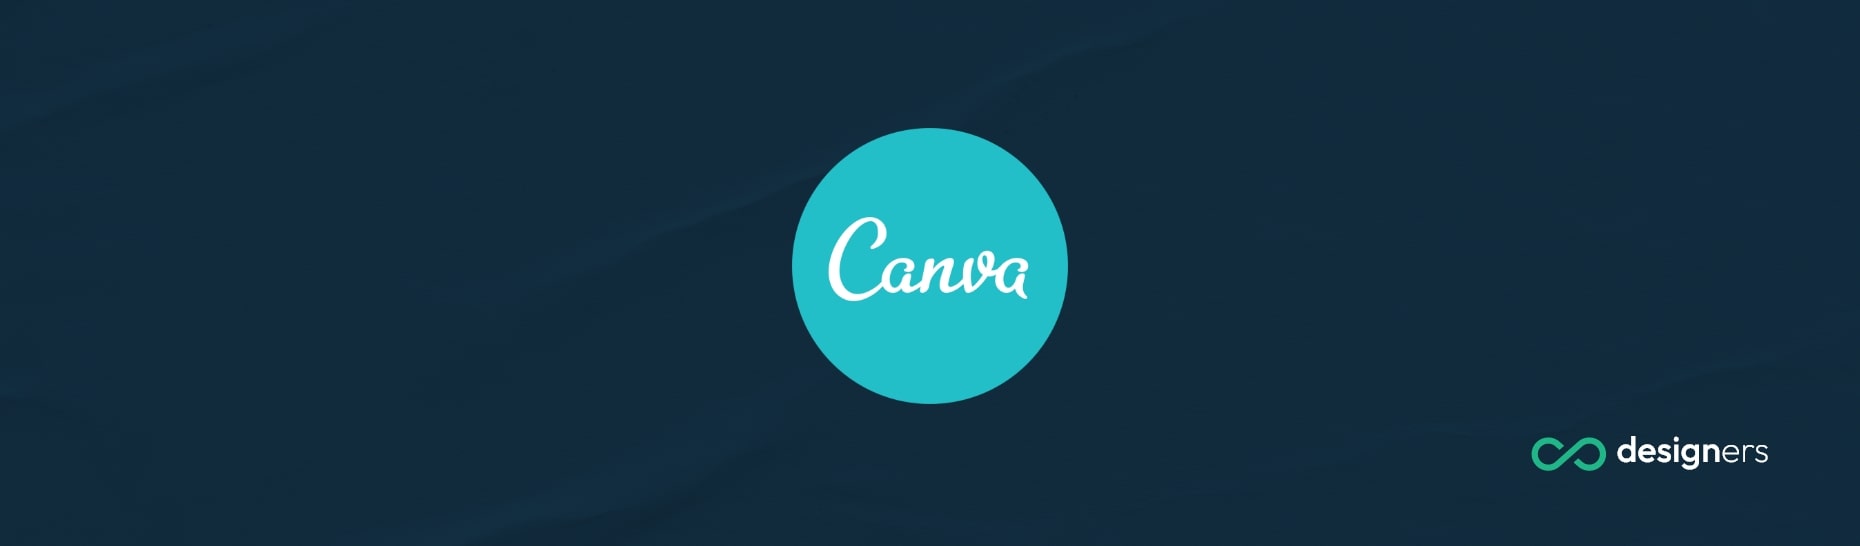 Are Canva Fonts Copyrighted?